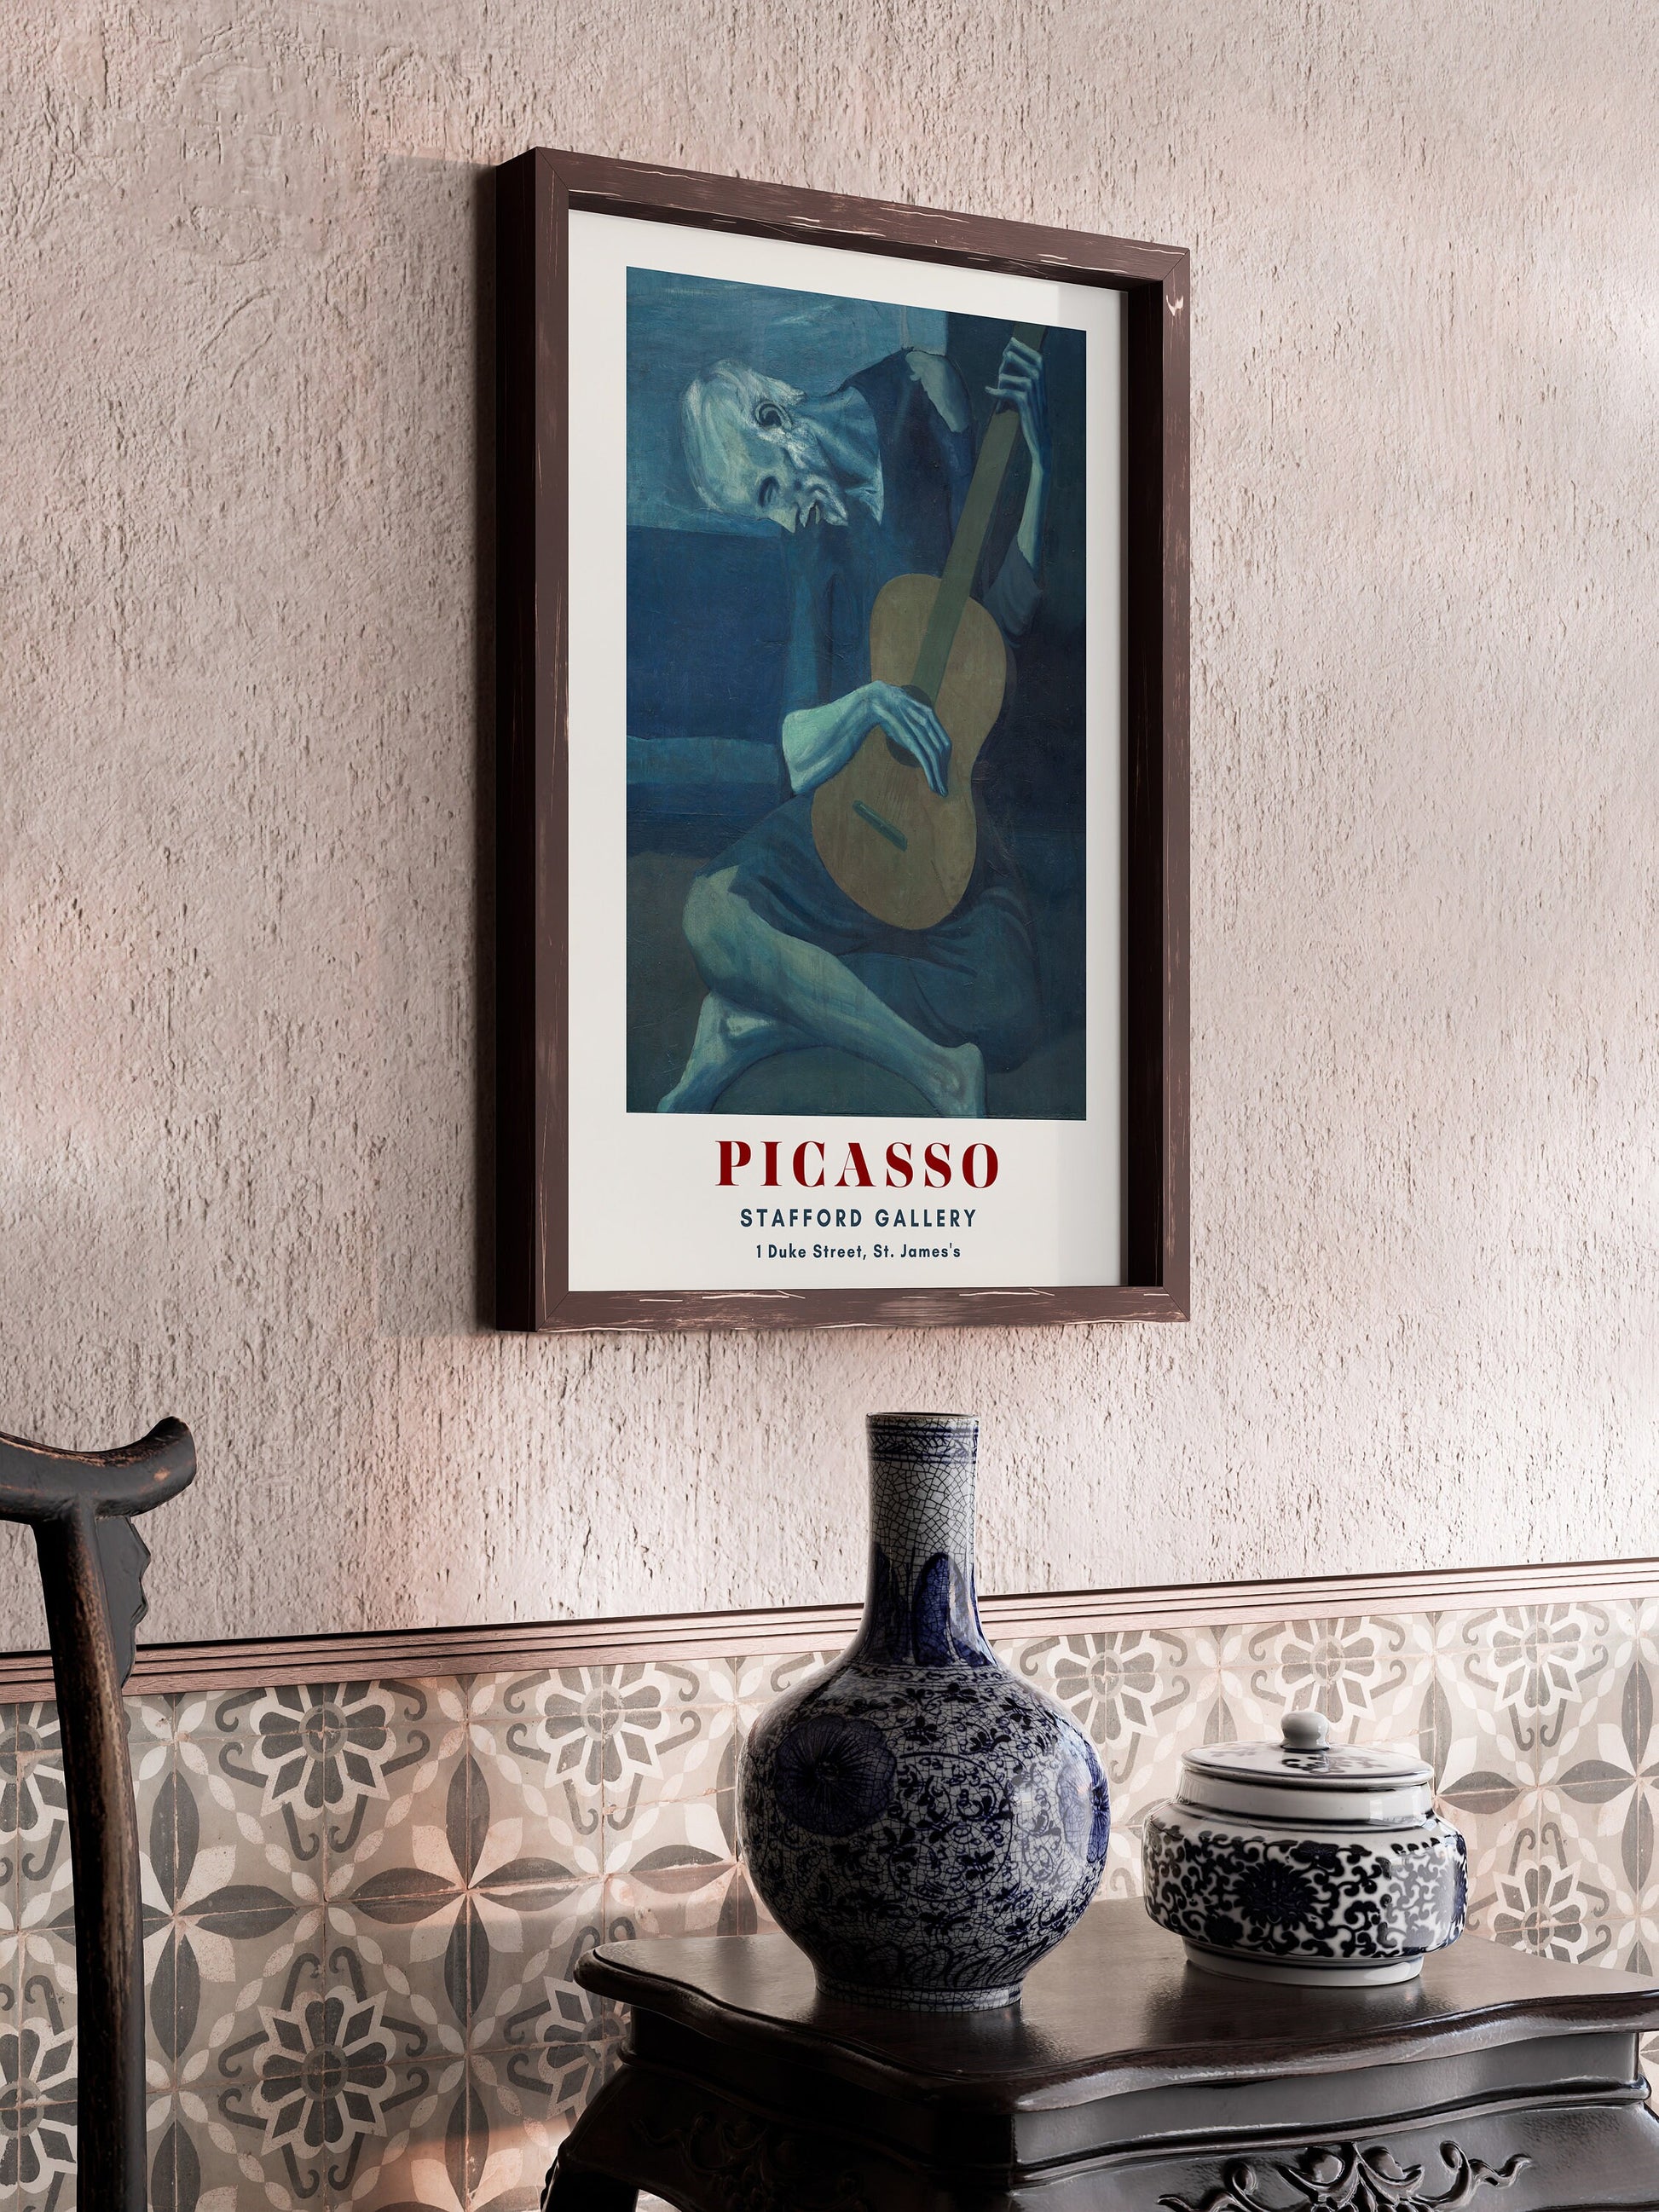 Framed Picasso The Old Guitarist Famous Painting Art Print Exhibition Museum Poster Ready to Hang Home Office Decor Gift Idea Blue Period